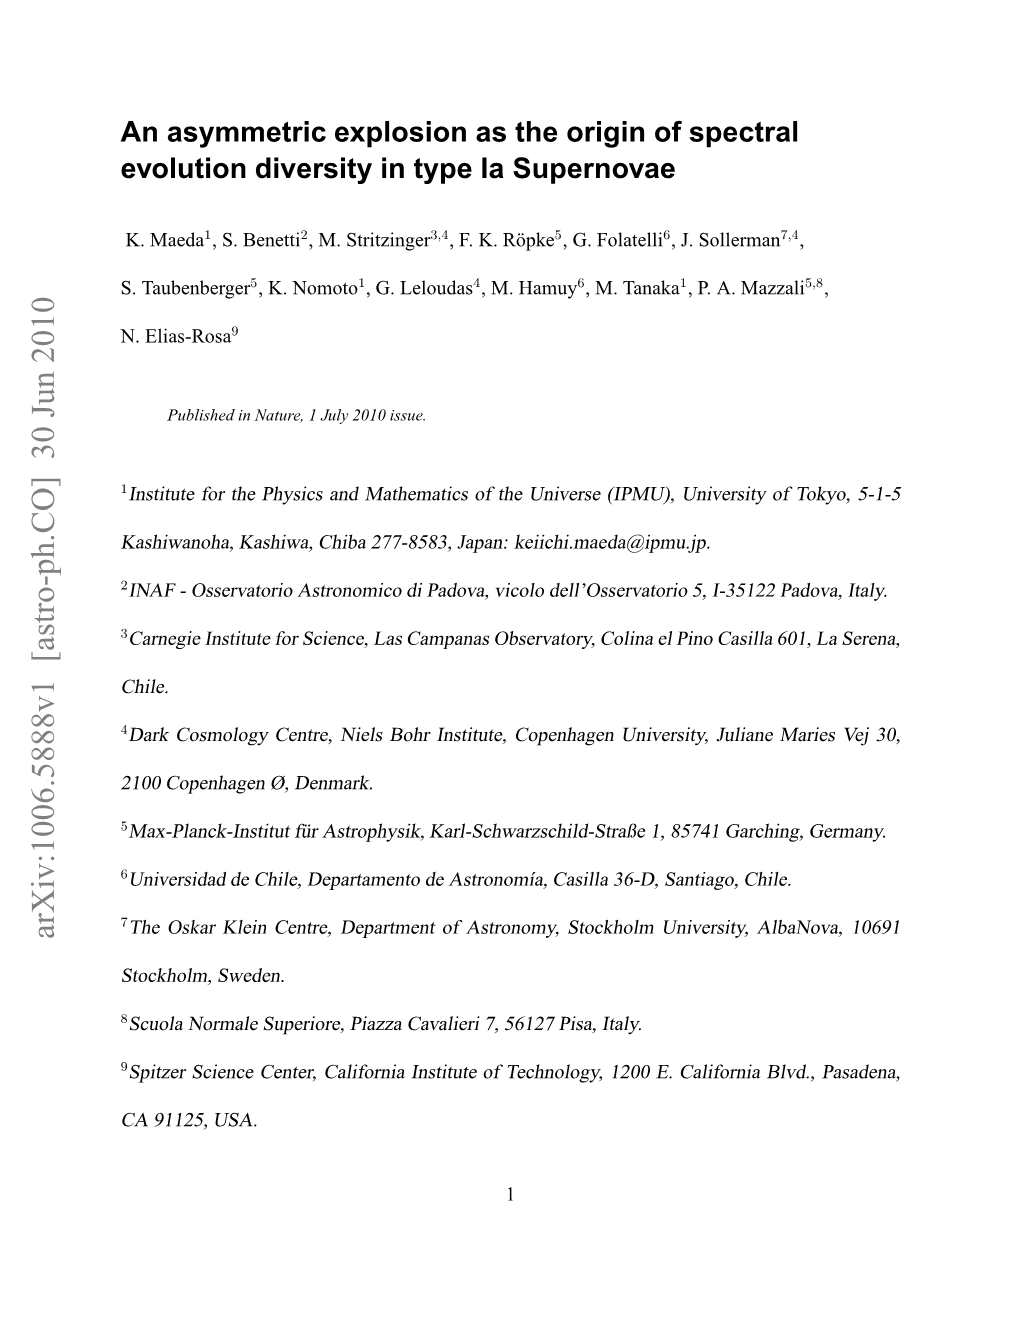 An Asymmetric Explosion As the Origin of Spectral Evolution Diversity in Type Ia Supernovae